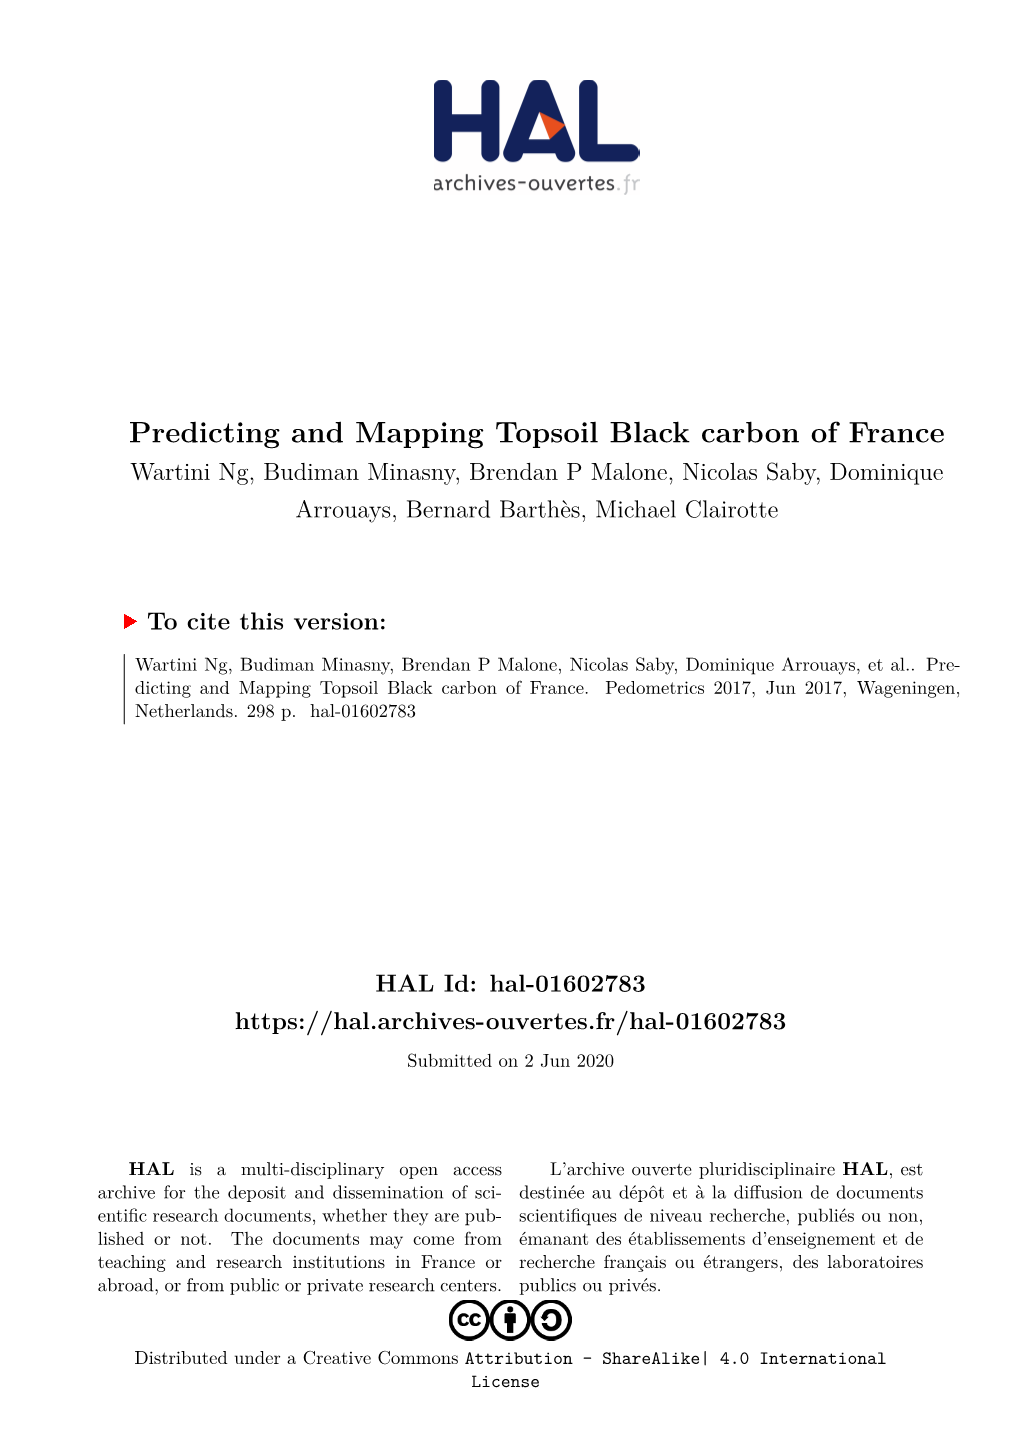 Predicting and Mapping Topsoil Black Carbon of France